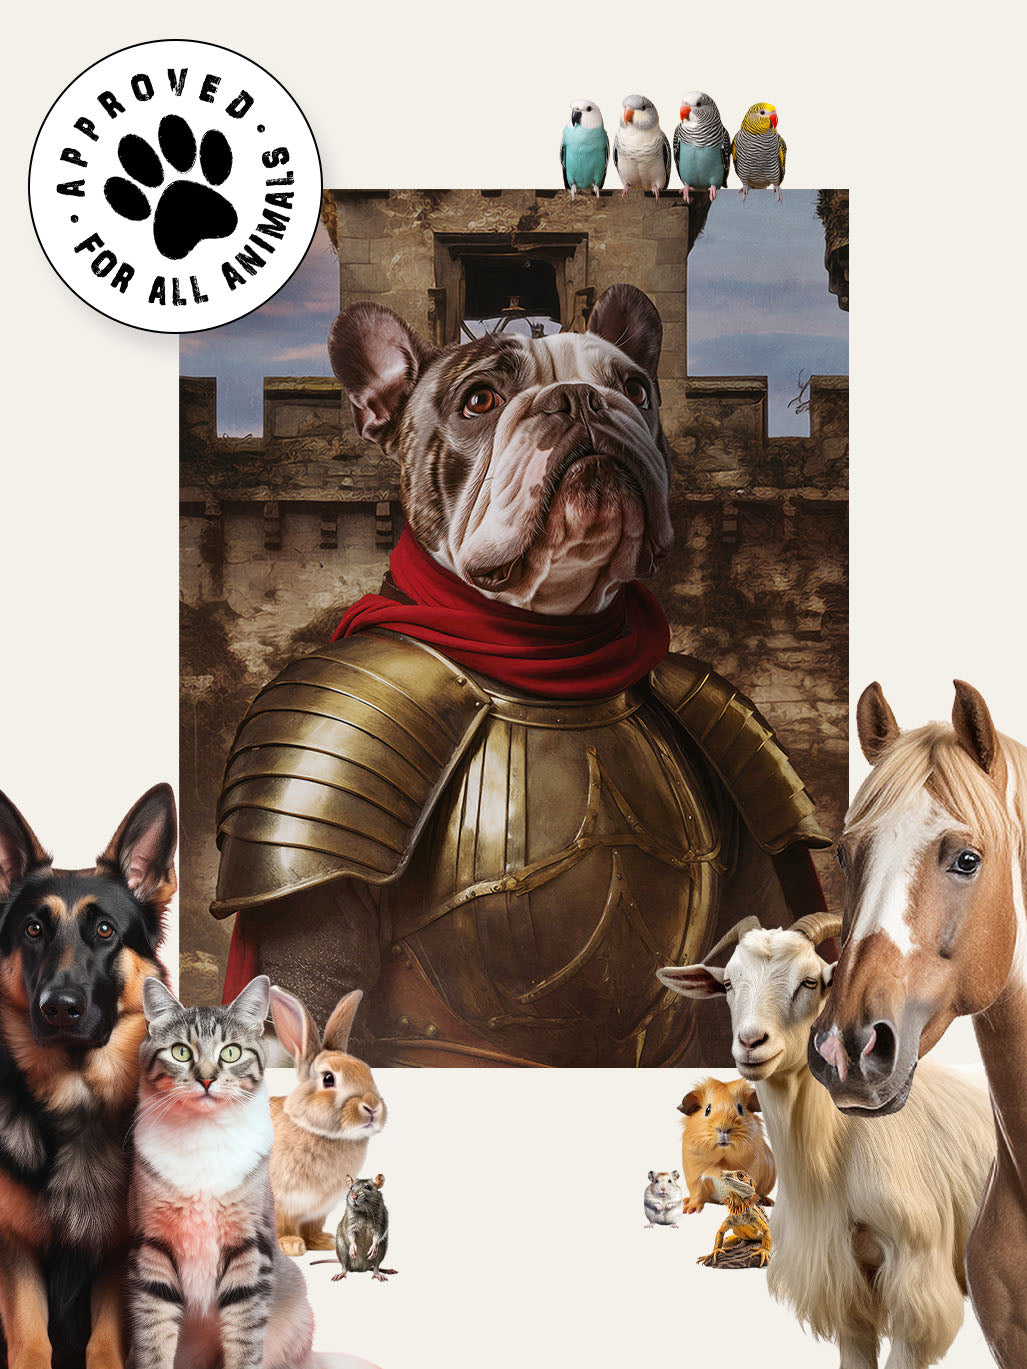 The Warden of the North - Custom Pet Blanket